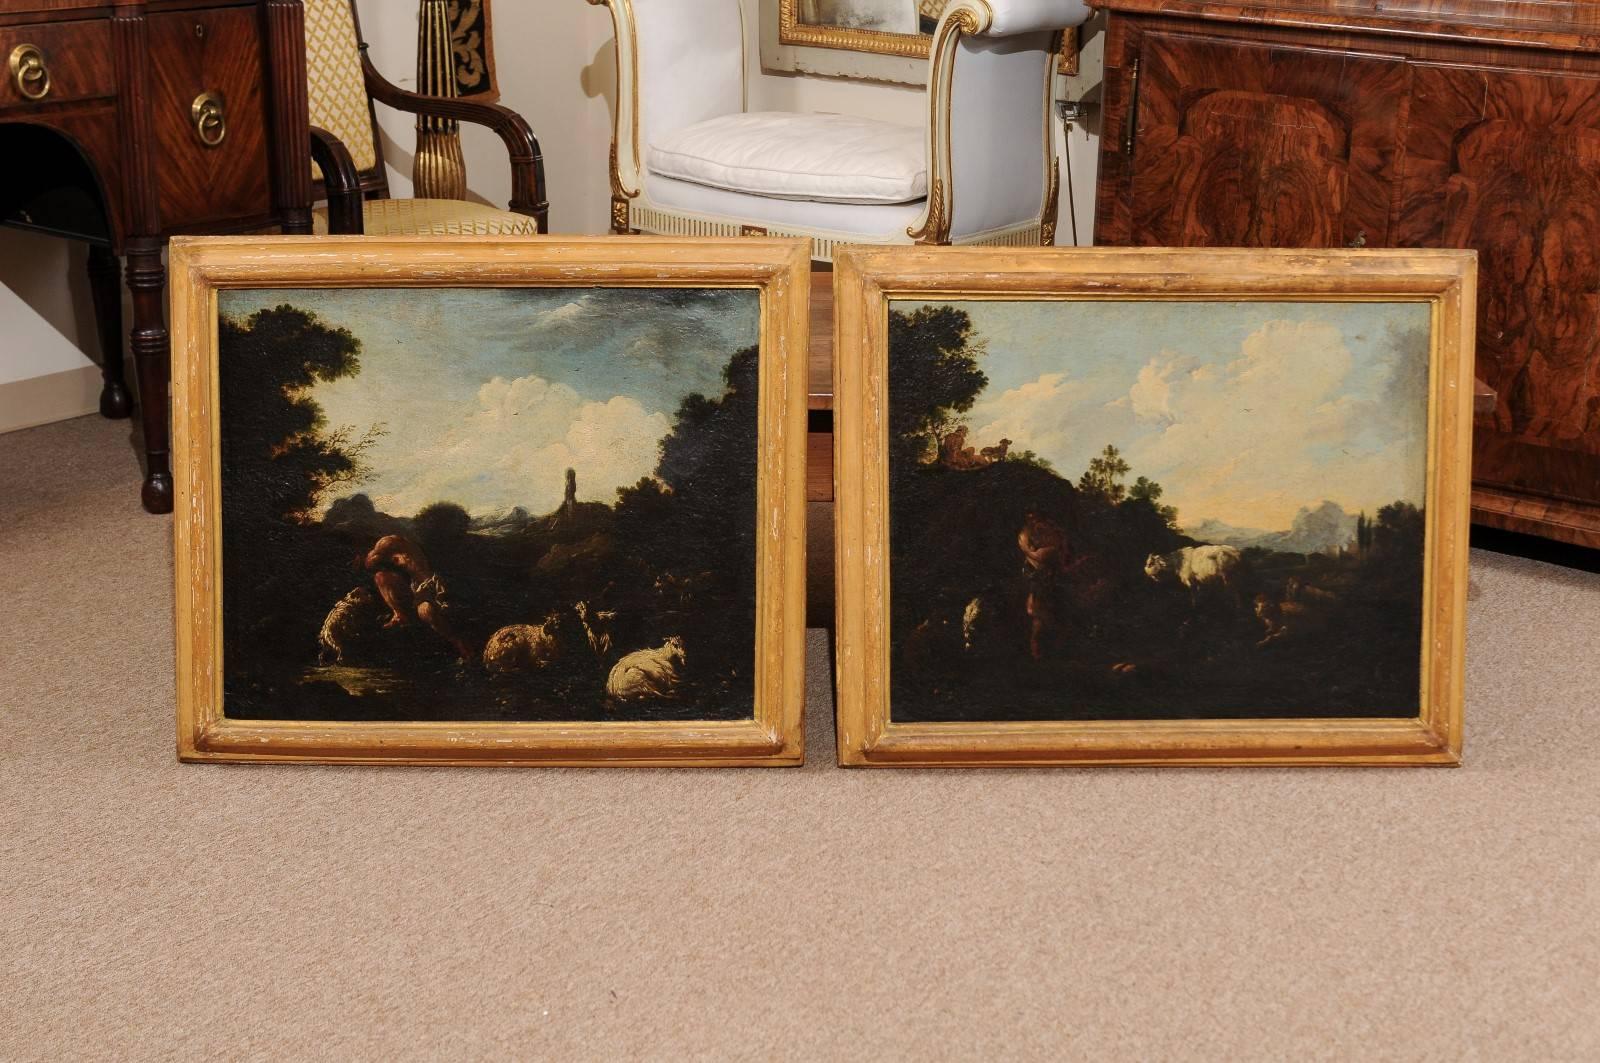 Pair of wood framed oil on canvas landscape paintings featuring goats in the foreground and village in the background, Italy 18th century. Frames in stripped wood finish.